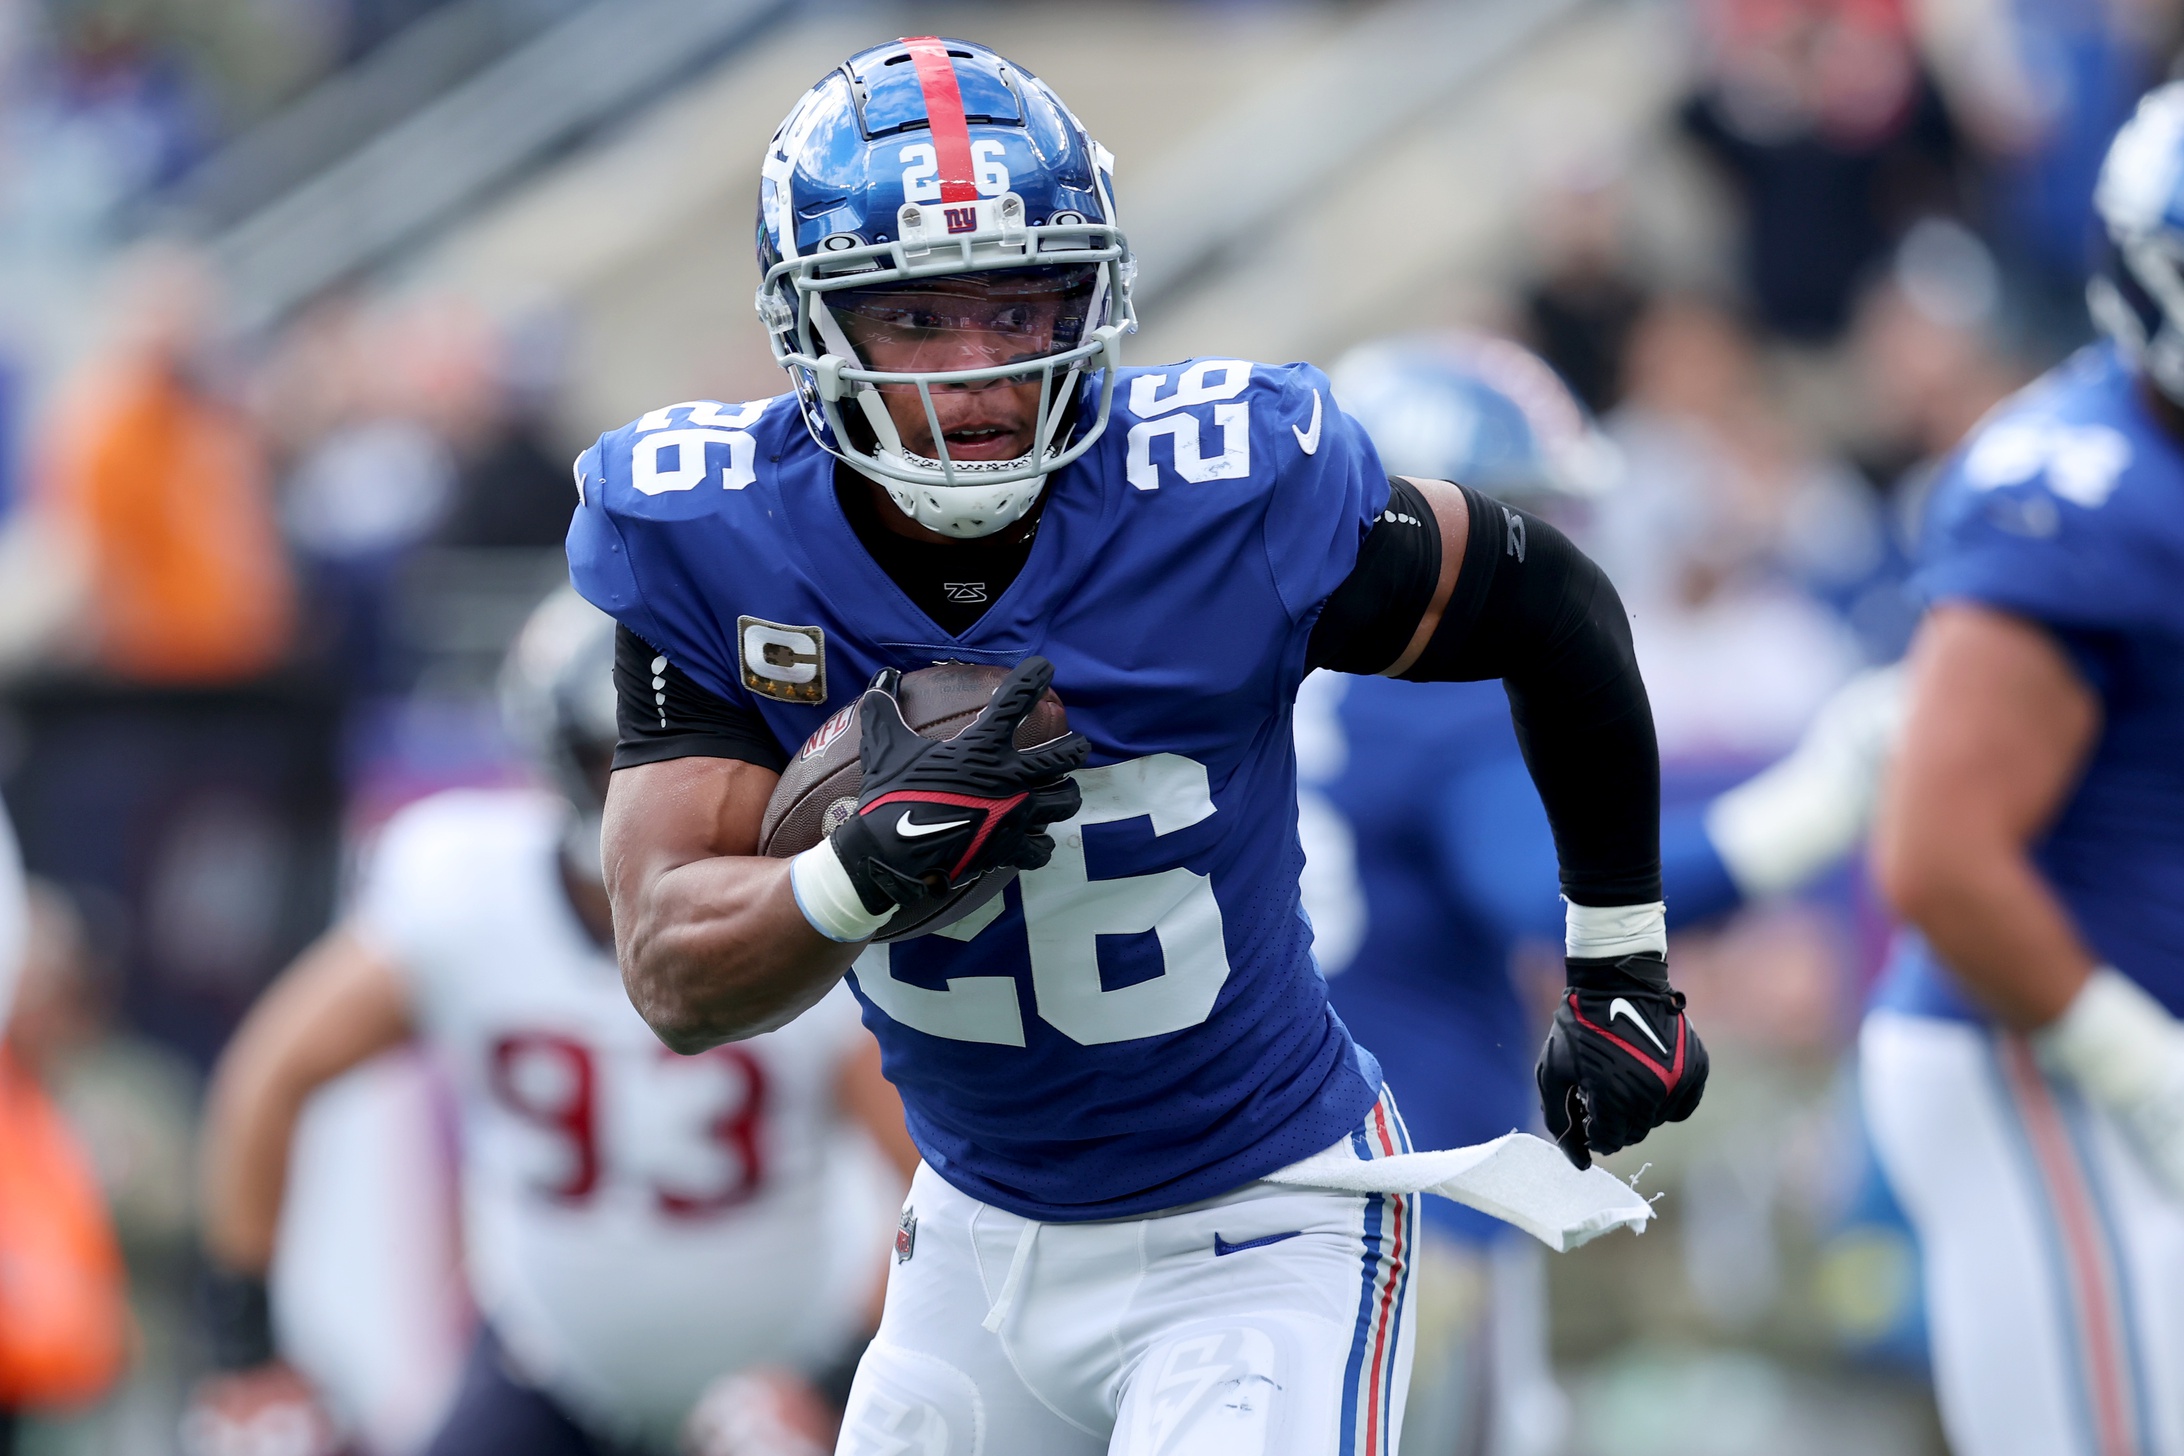 Giants' Daniel Jones Reportedly Added 10 Pounds of Muscle During